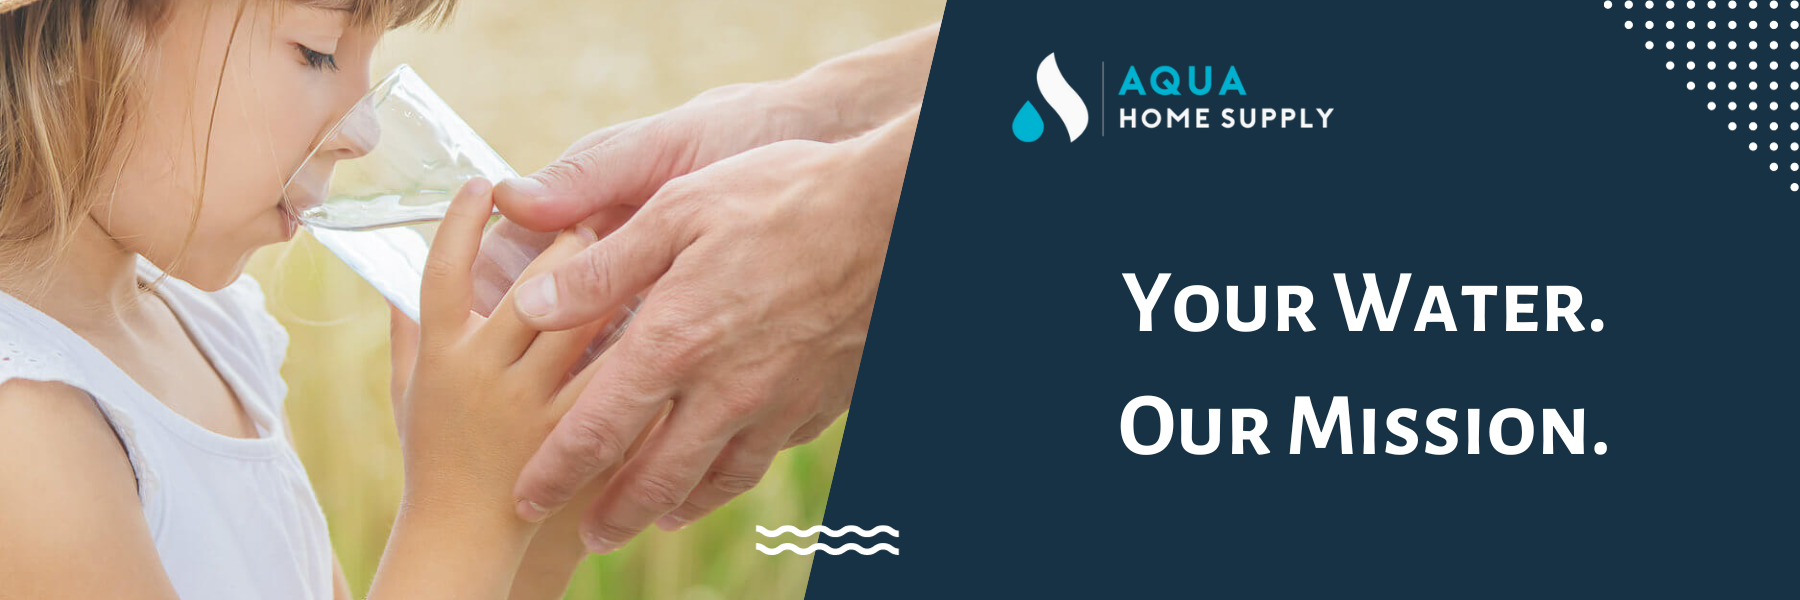 Aqua Home Supply - Your Water. Our Mission.